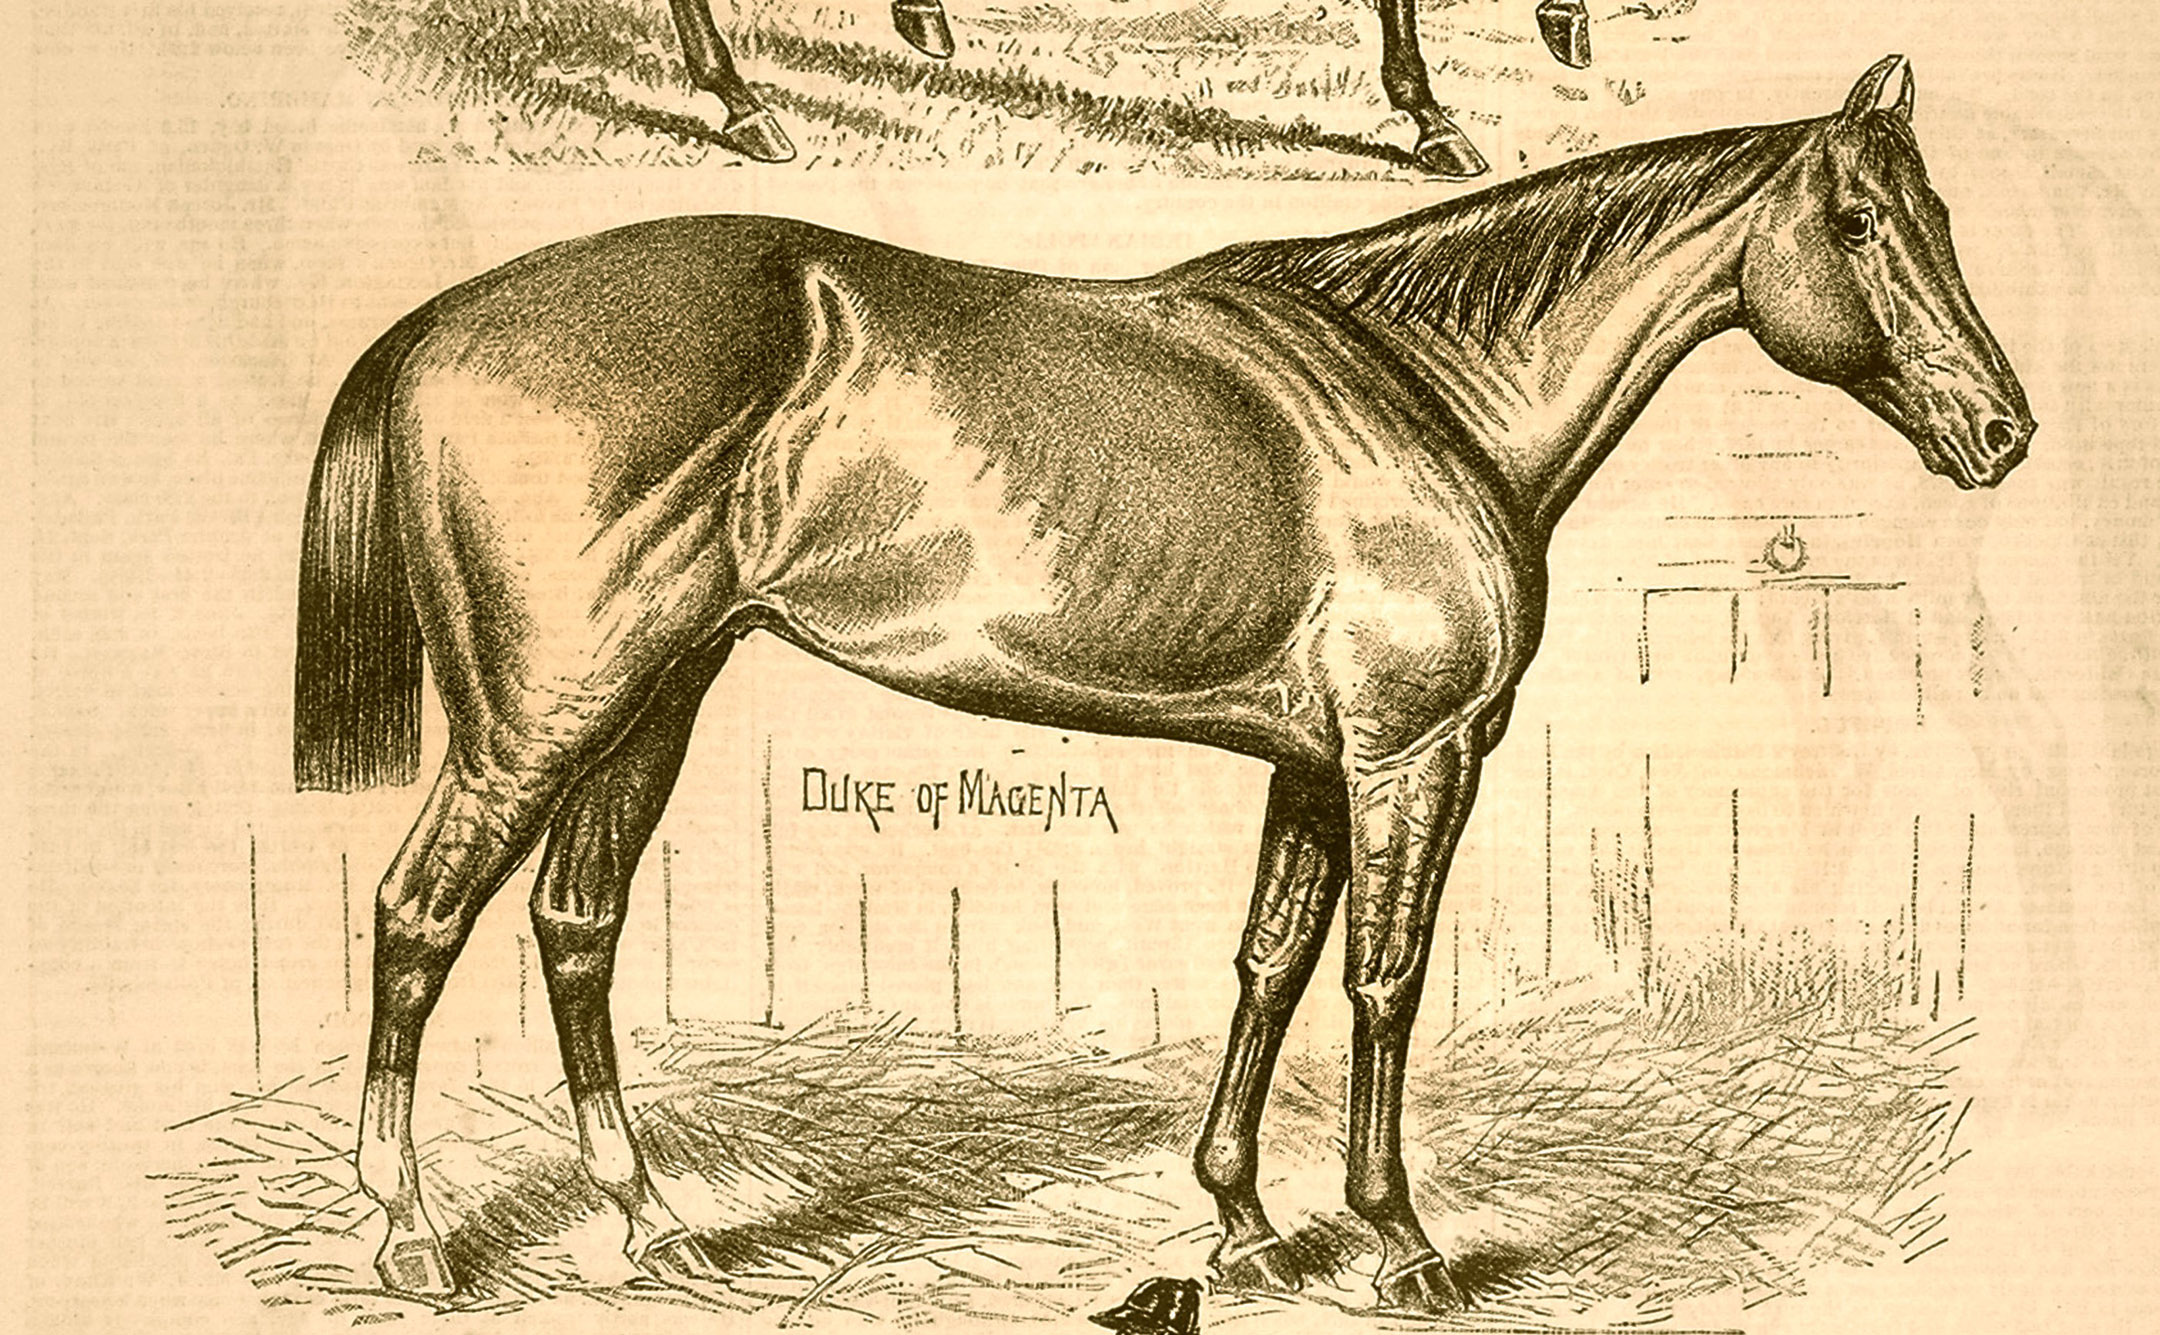 A likeness of Duke of Magenta from the "Spirit of the Times" (Keeneland Library Collection)